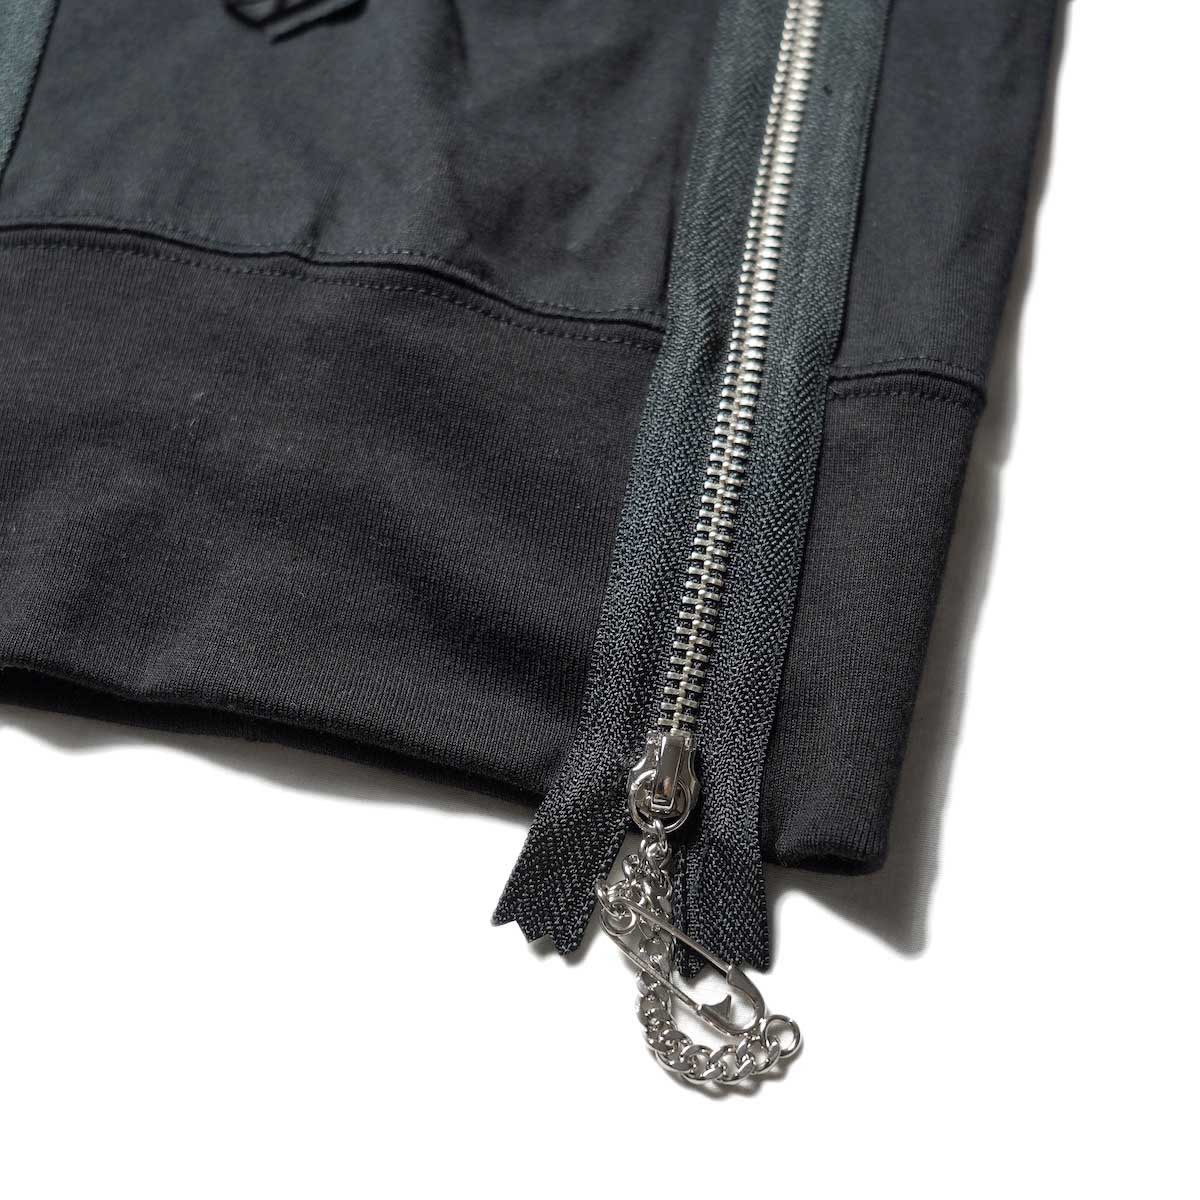 The Soloist / sa.0001bAW21 jersey neck warmer. (Black)ファスナー、装飾